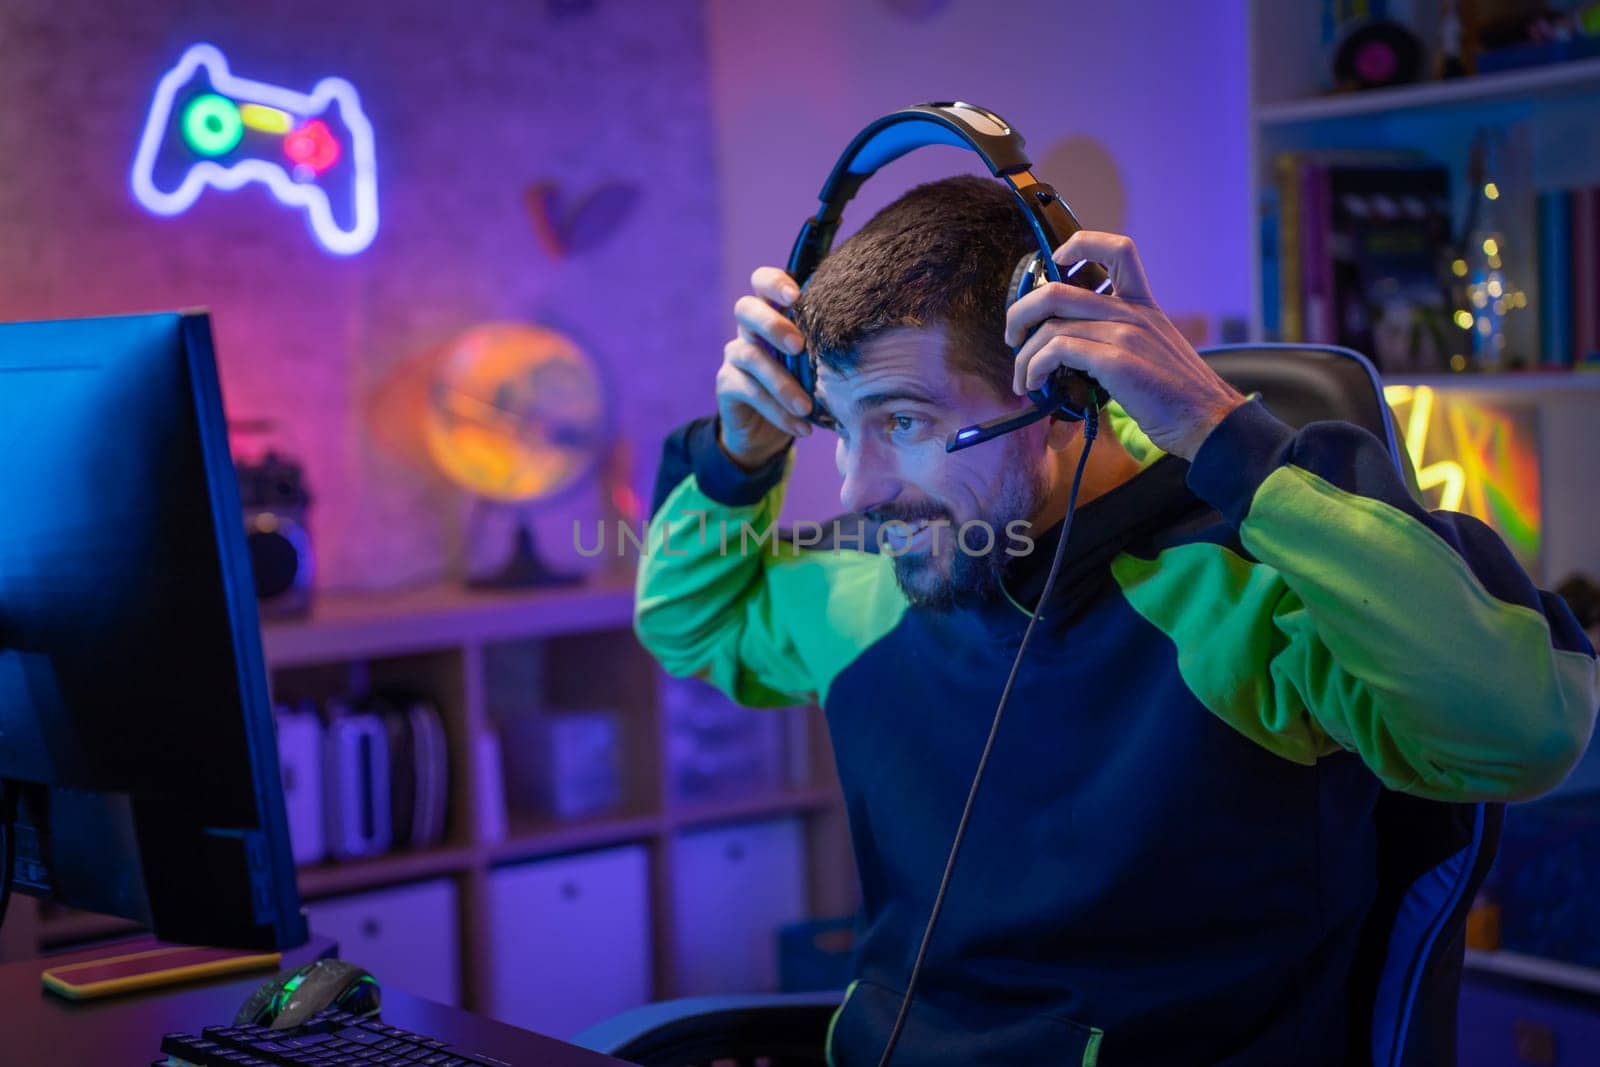 Gamer playing excited online video game with headphones streaming on computer in a neon light room. by PaulCarr